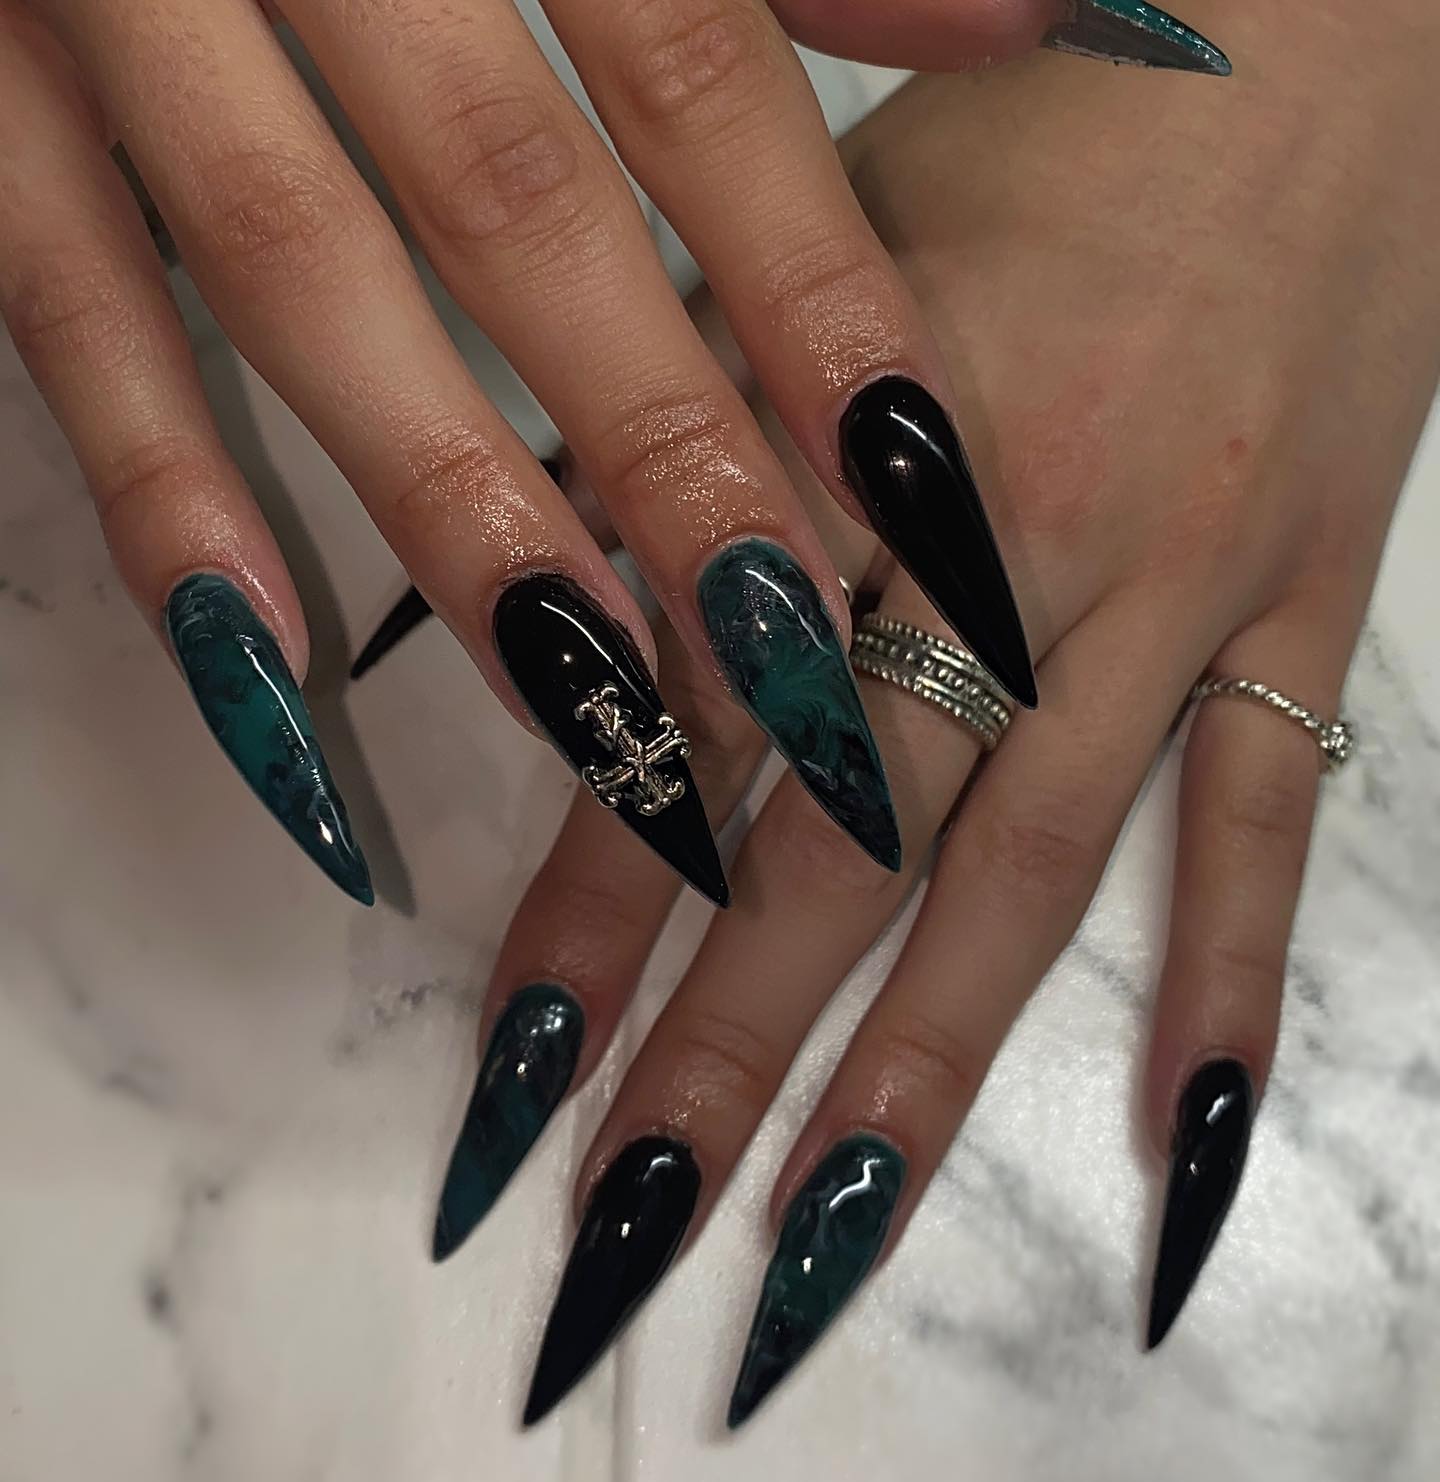 Dark Army Green Press on Nails Fall Nails Matte or Gloss Choose Your Shape  Coffin Nails Stiletto Nails Glue on Nails - Etsy